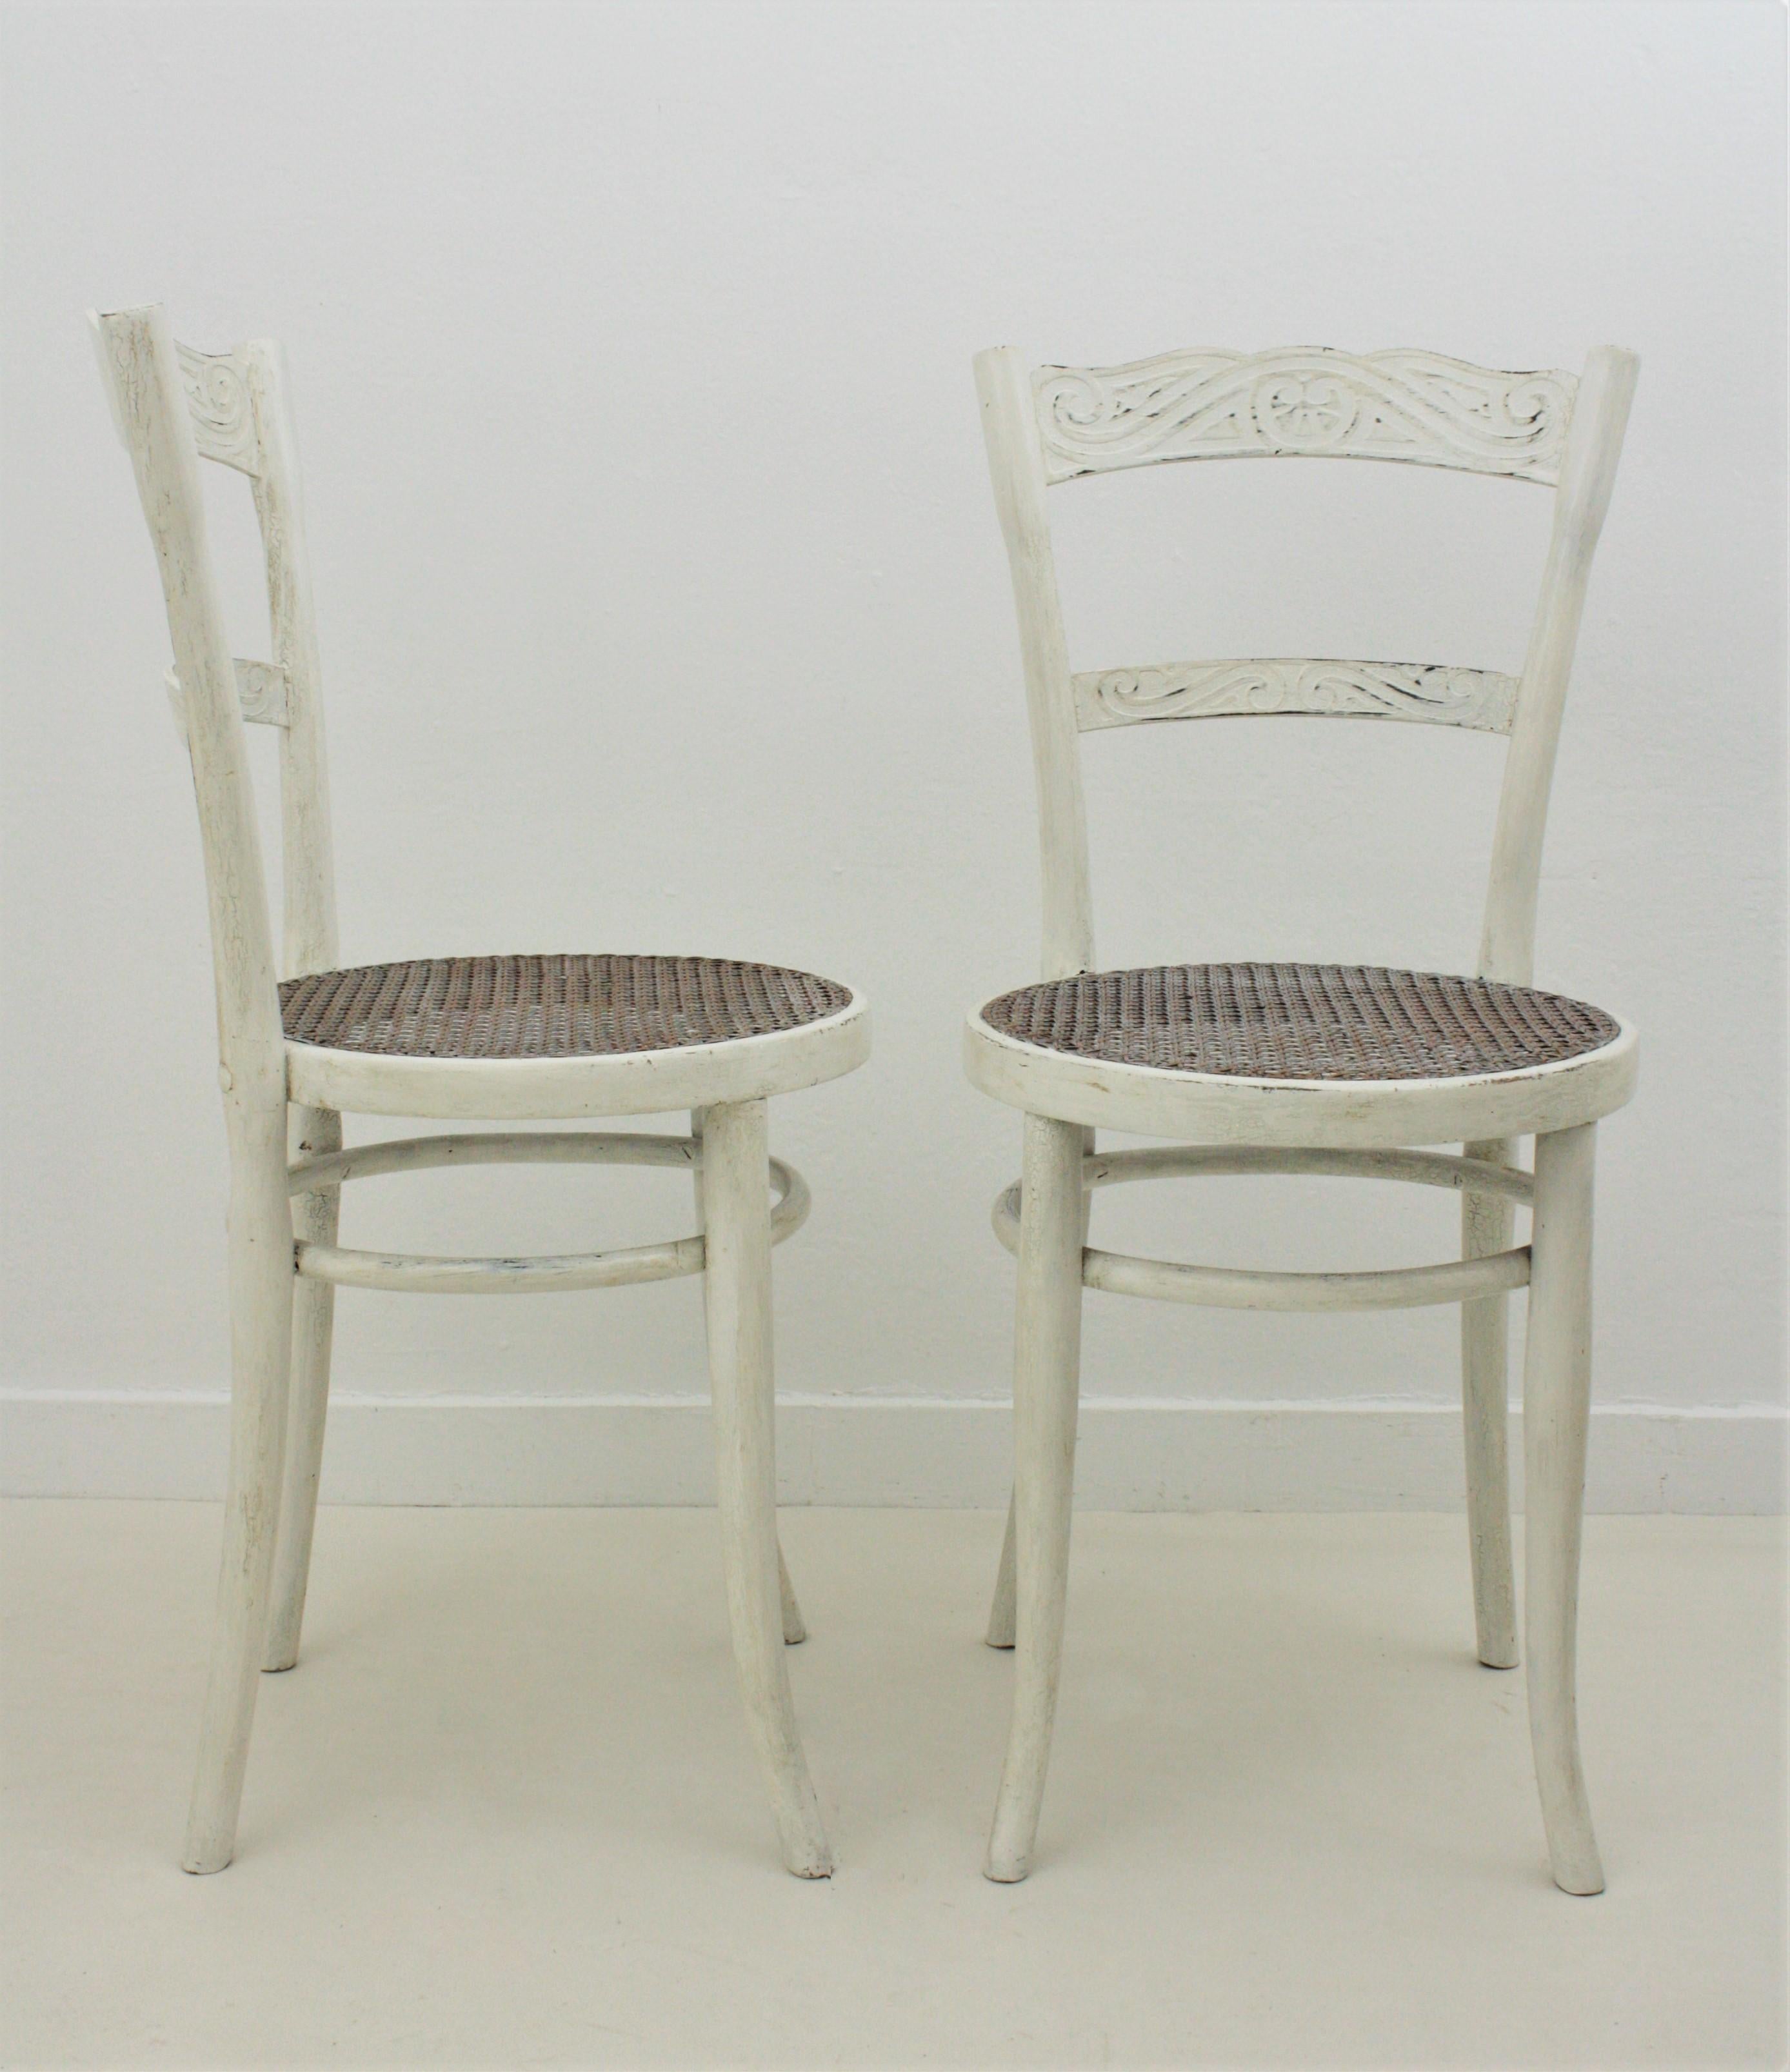 Beautiful pair of bentwood chairs patinated in white color with cane weave seats. Manufactured by J & J Kohn. Austria, 1900s.
Both are marked with the original manufacturers paper label. : Jacob and Josef Kohn, Austria. Number: 47
The chairs are